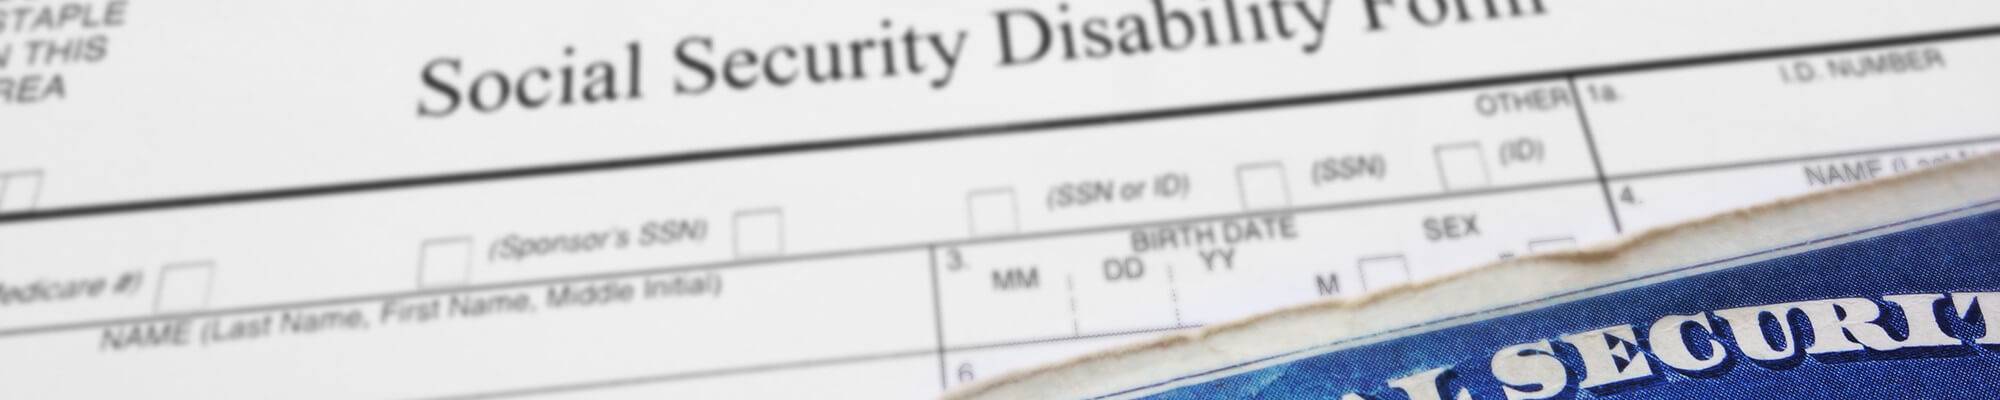 Social Security Disability Filing